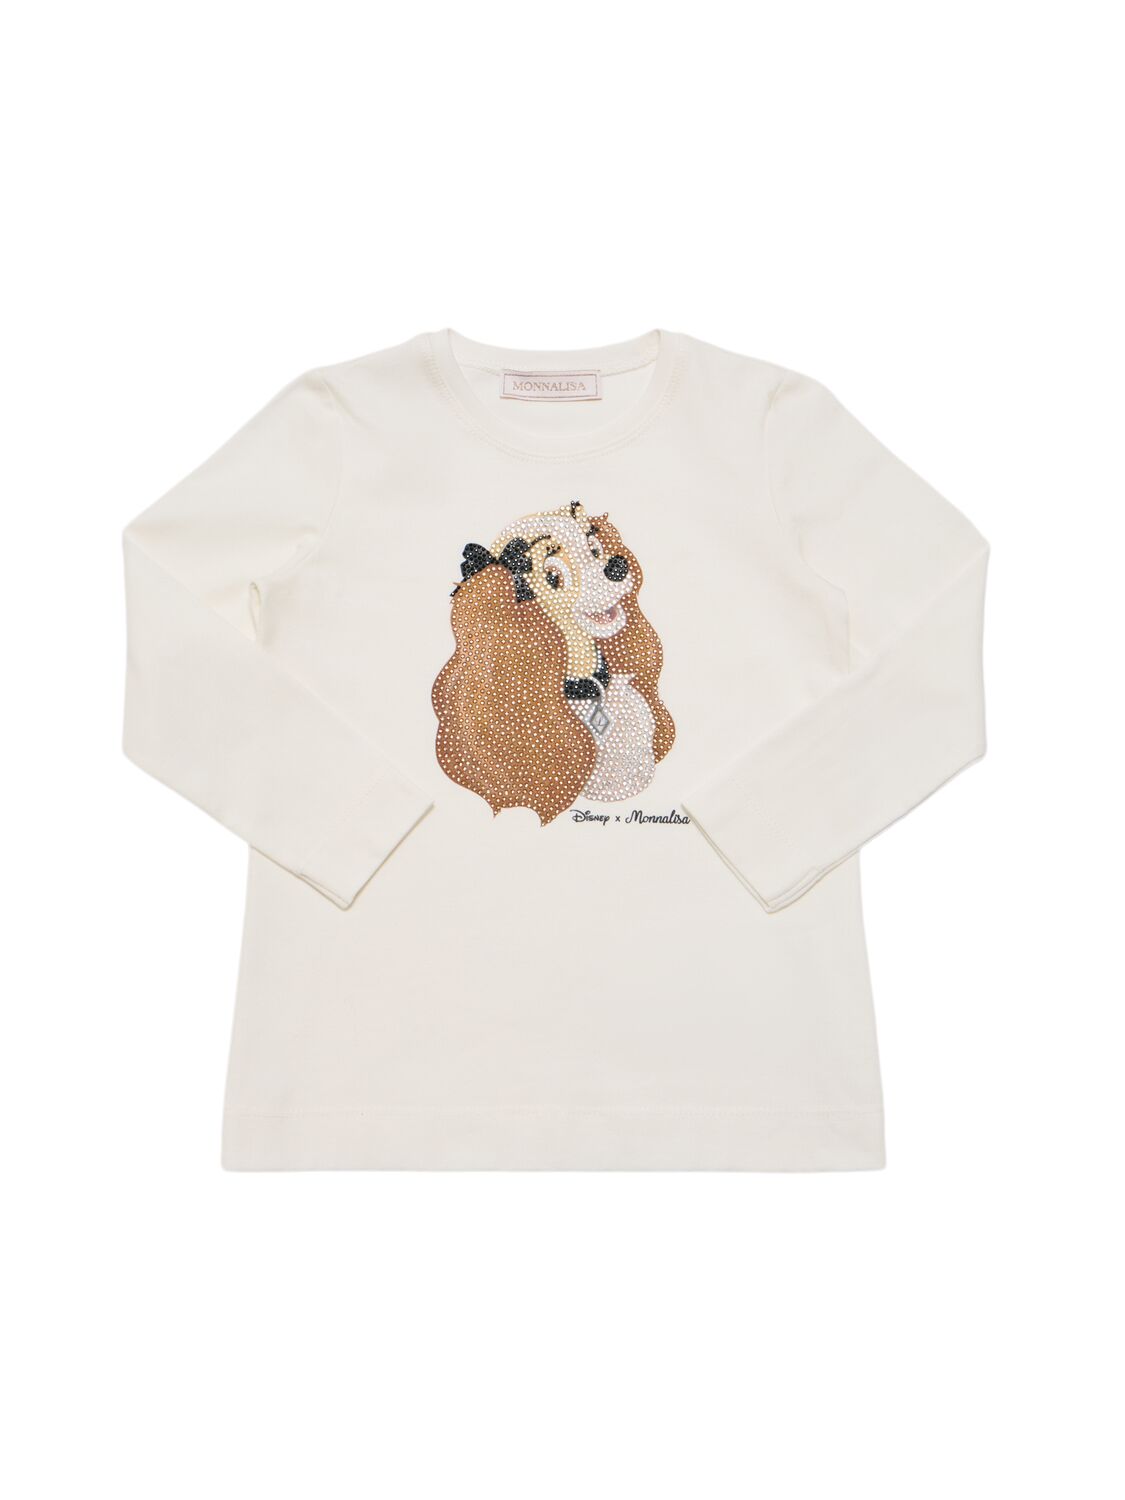 Monnalisa Lady And The Tramp Print Cotton T-shirt In White